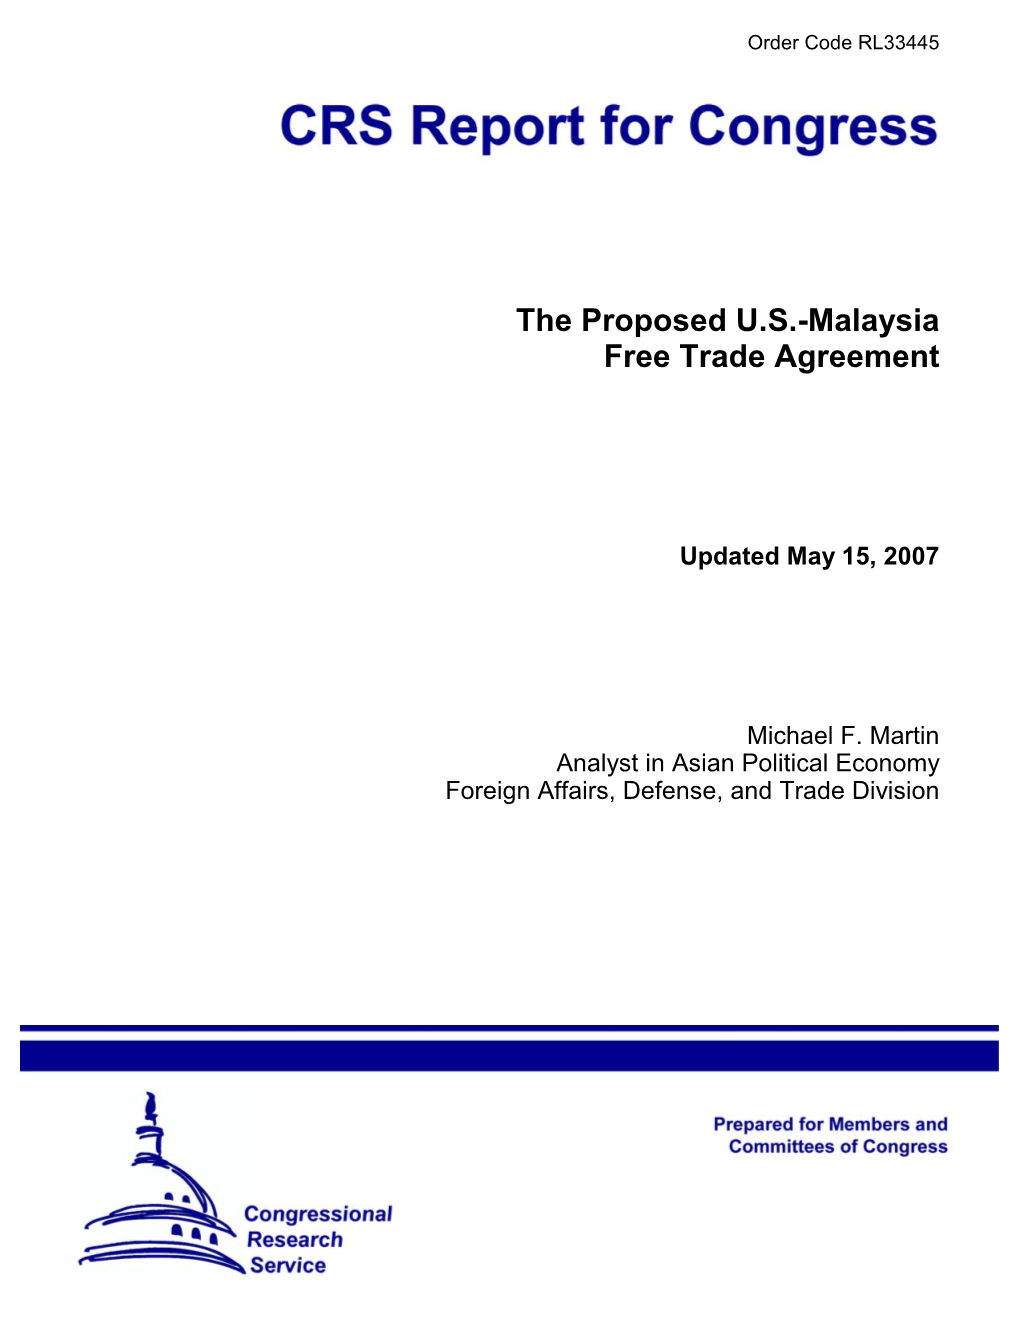 The Proposed US-Malaysia Free Trade Agreement